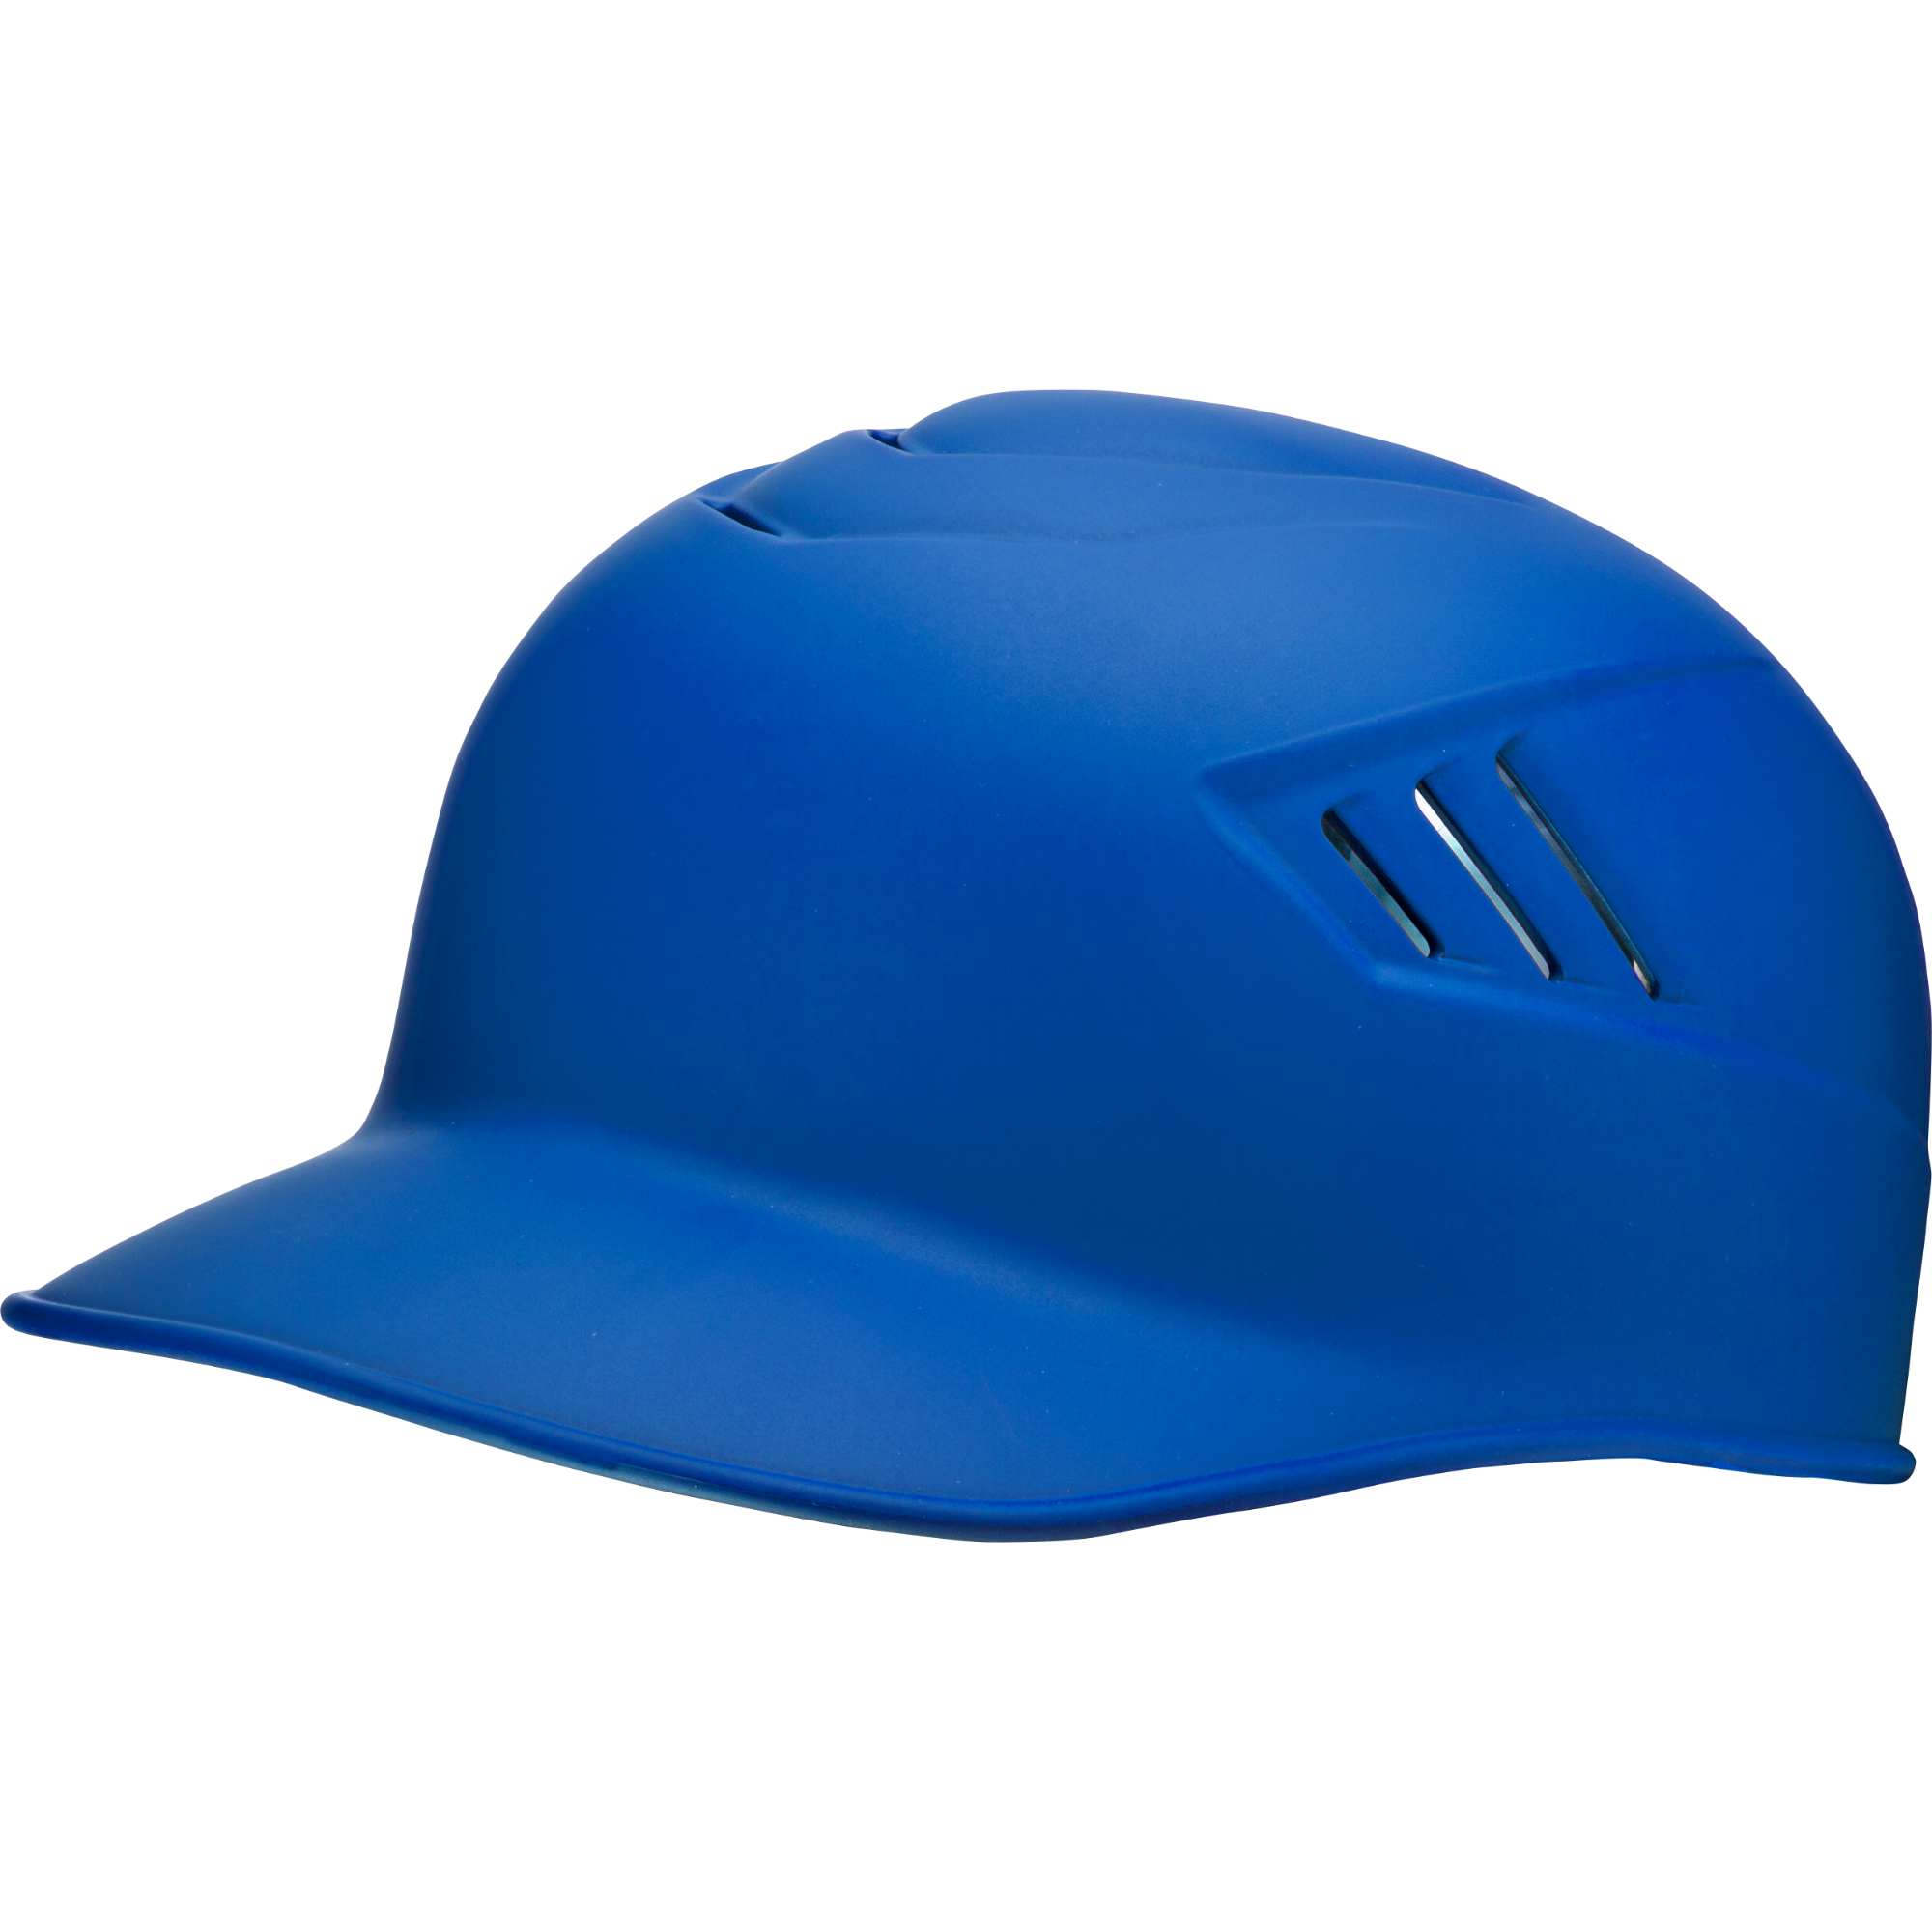 Rawlings Coolflo 1 Tone Catchers And  Base Coach Skull Cap Helmet - Matte Royal